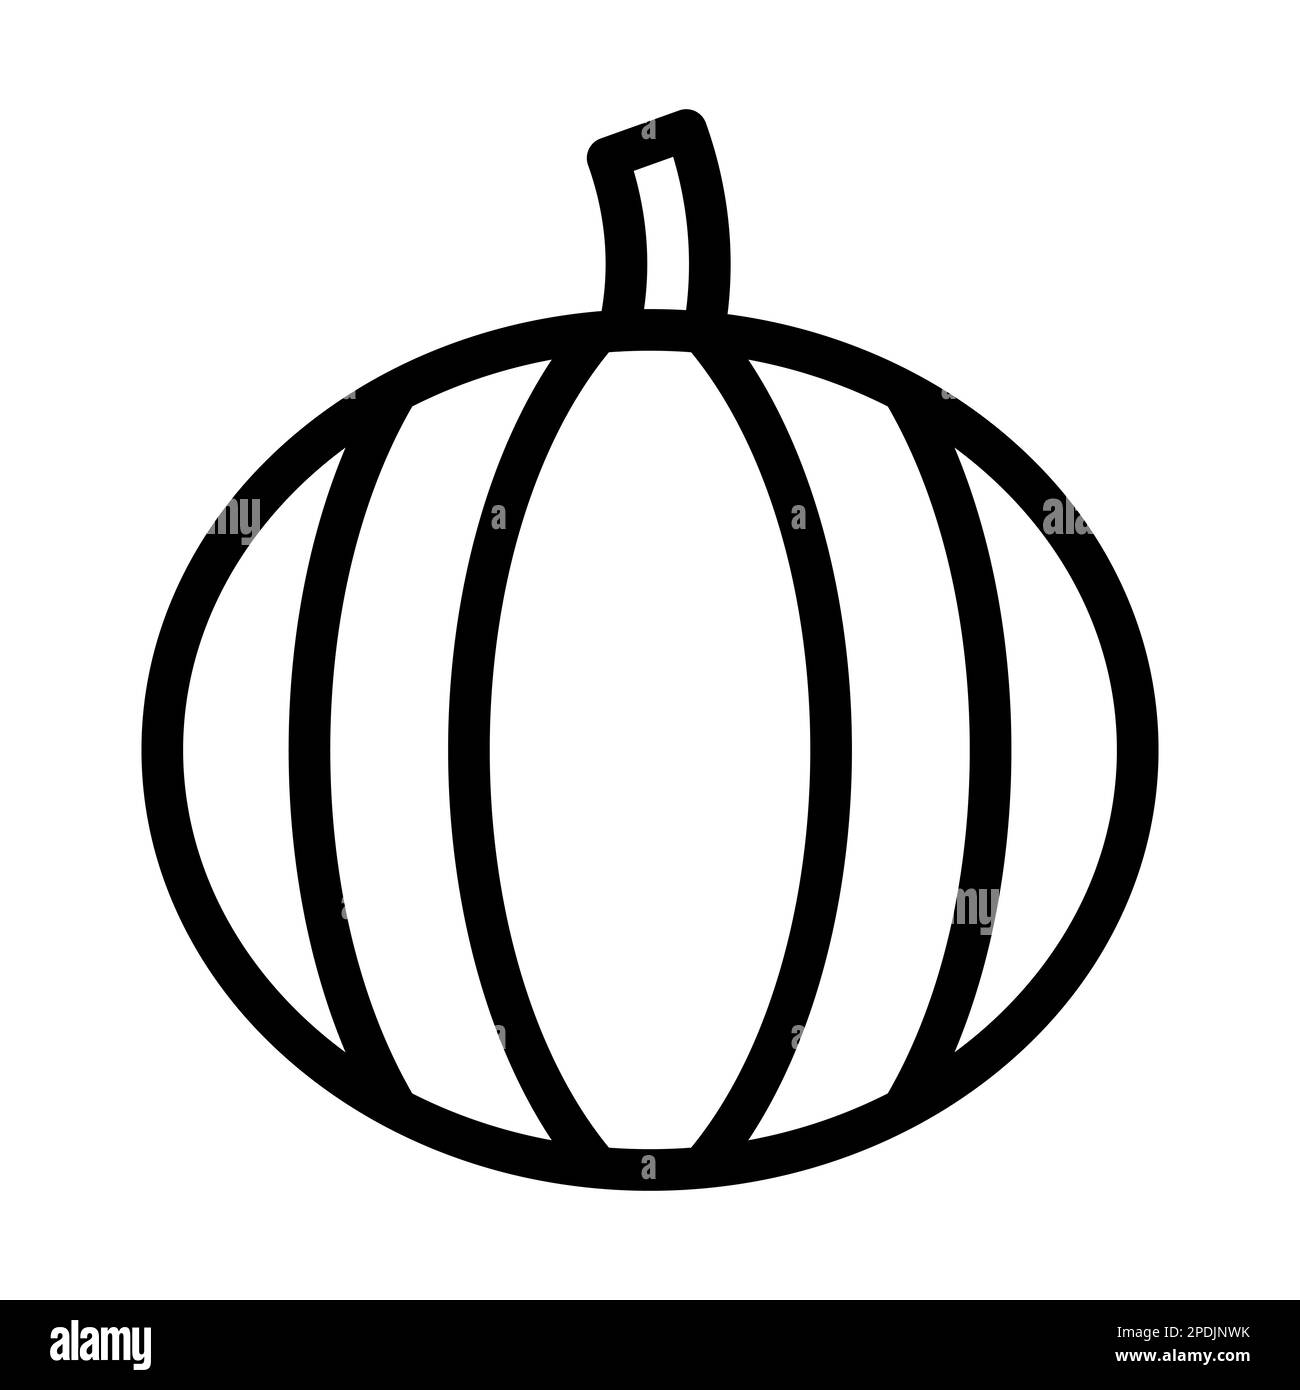 Gem Squash Vector Thick Line Icon For Personal And Commercial Use. Stock Photo